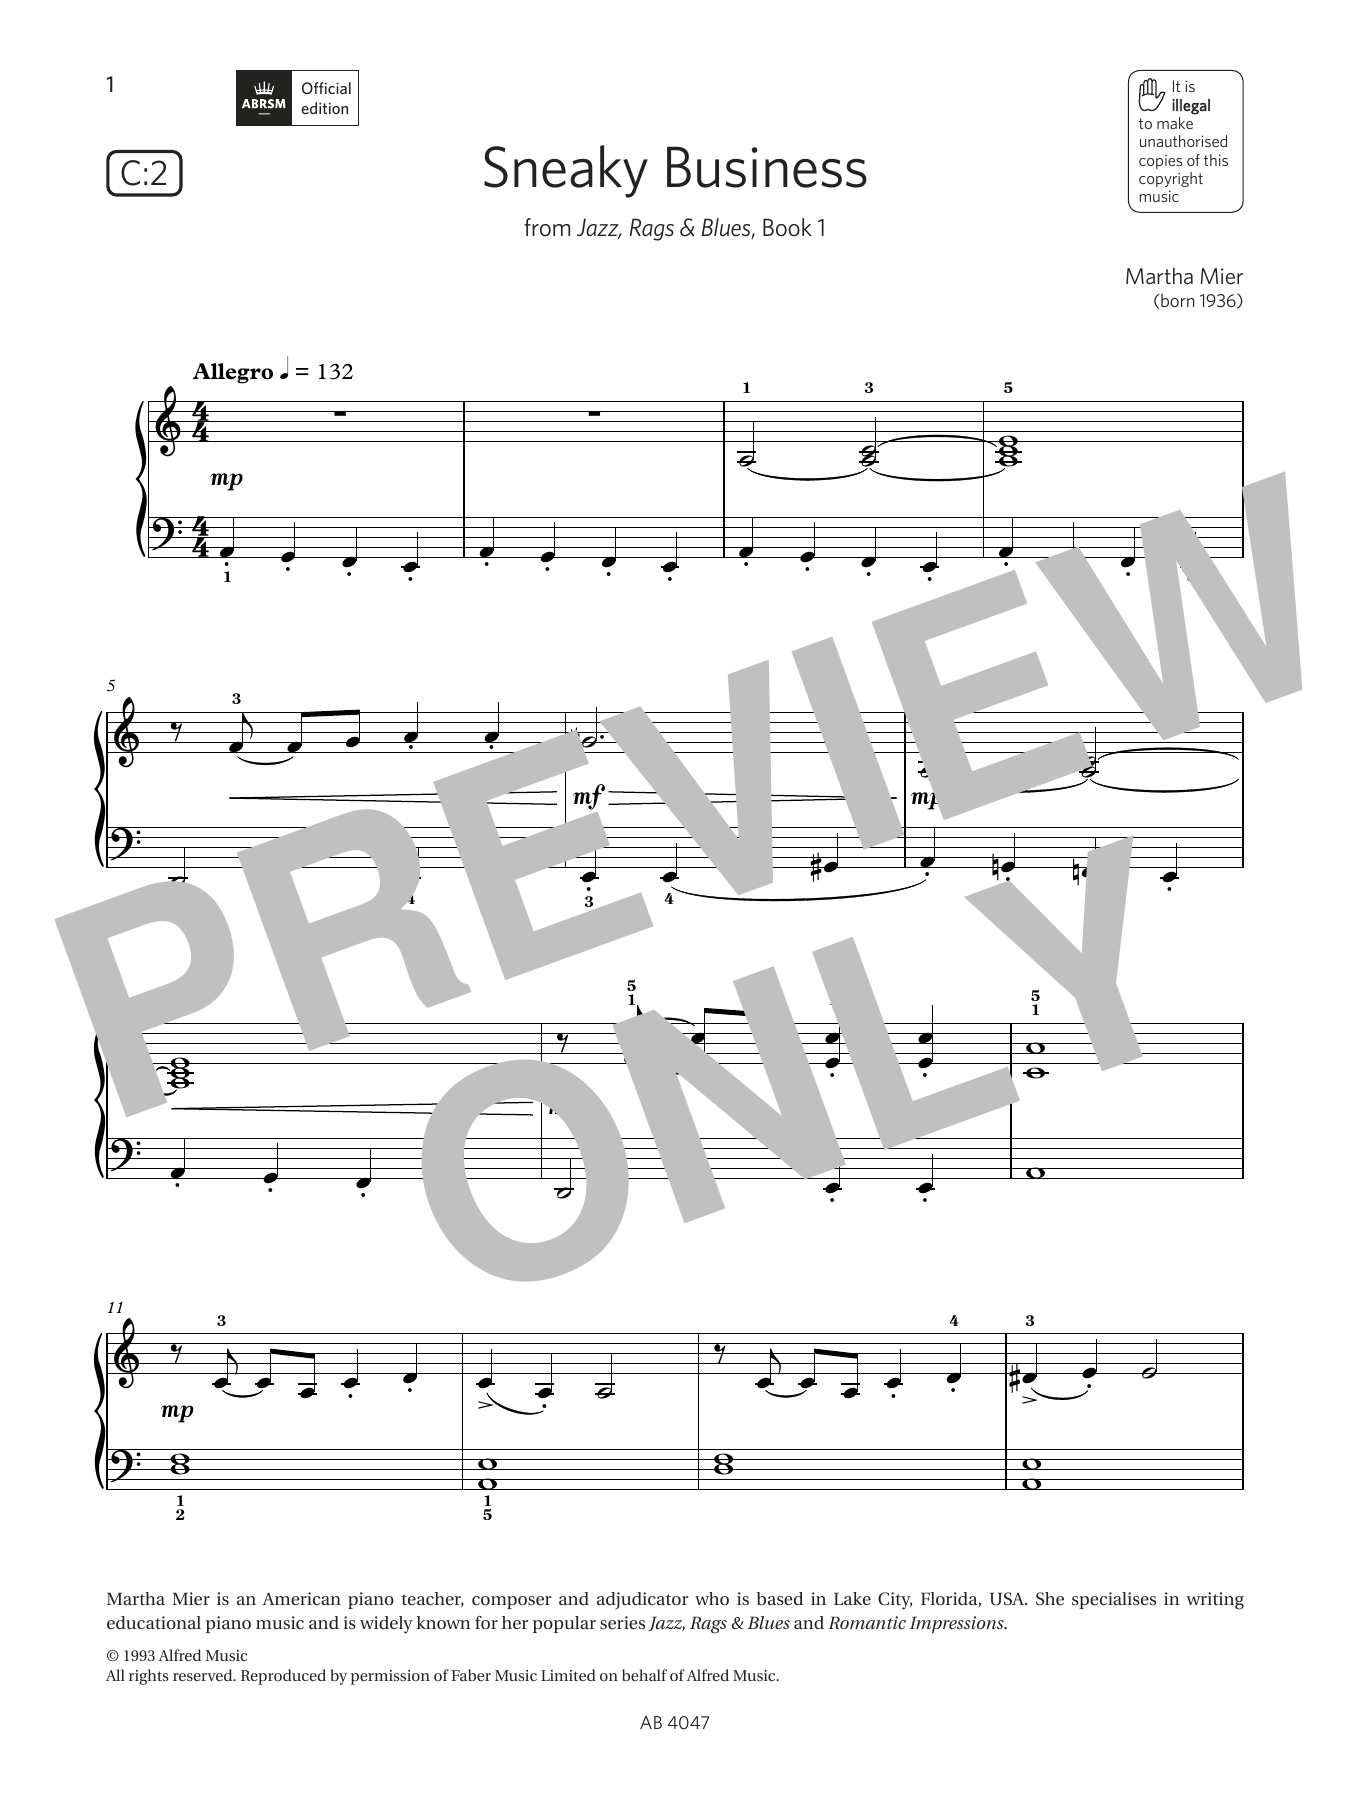 Download Martha Mier Sneaky Business (Grade 1, list C2, from Sheet Music